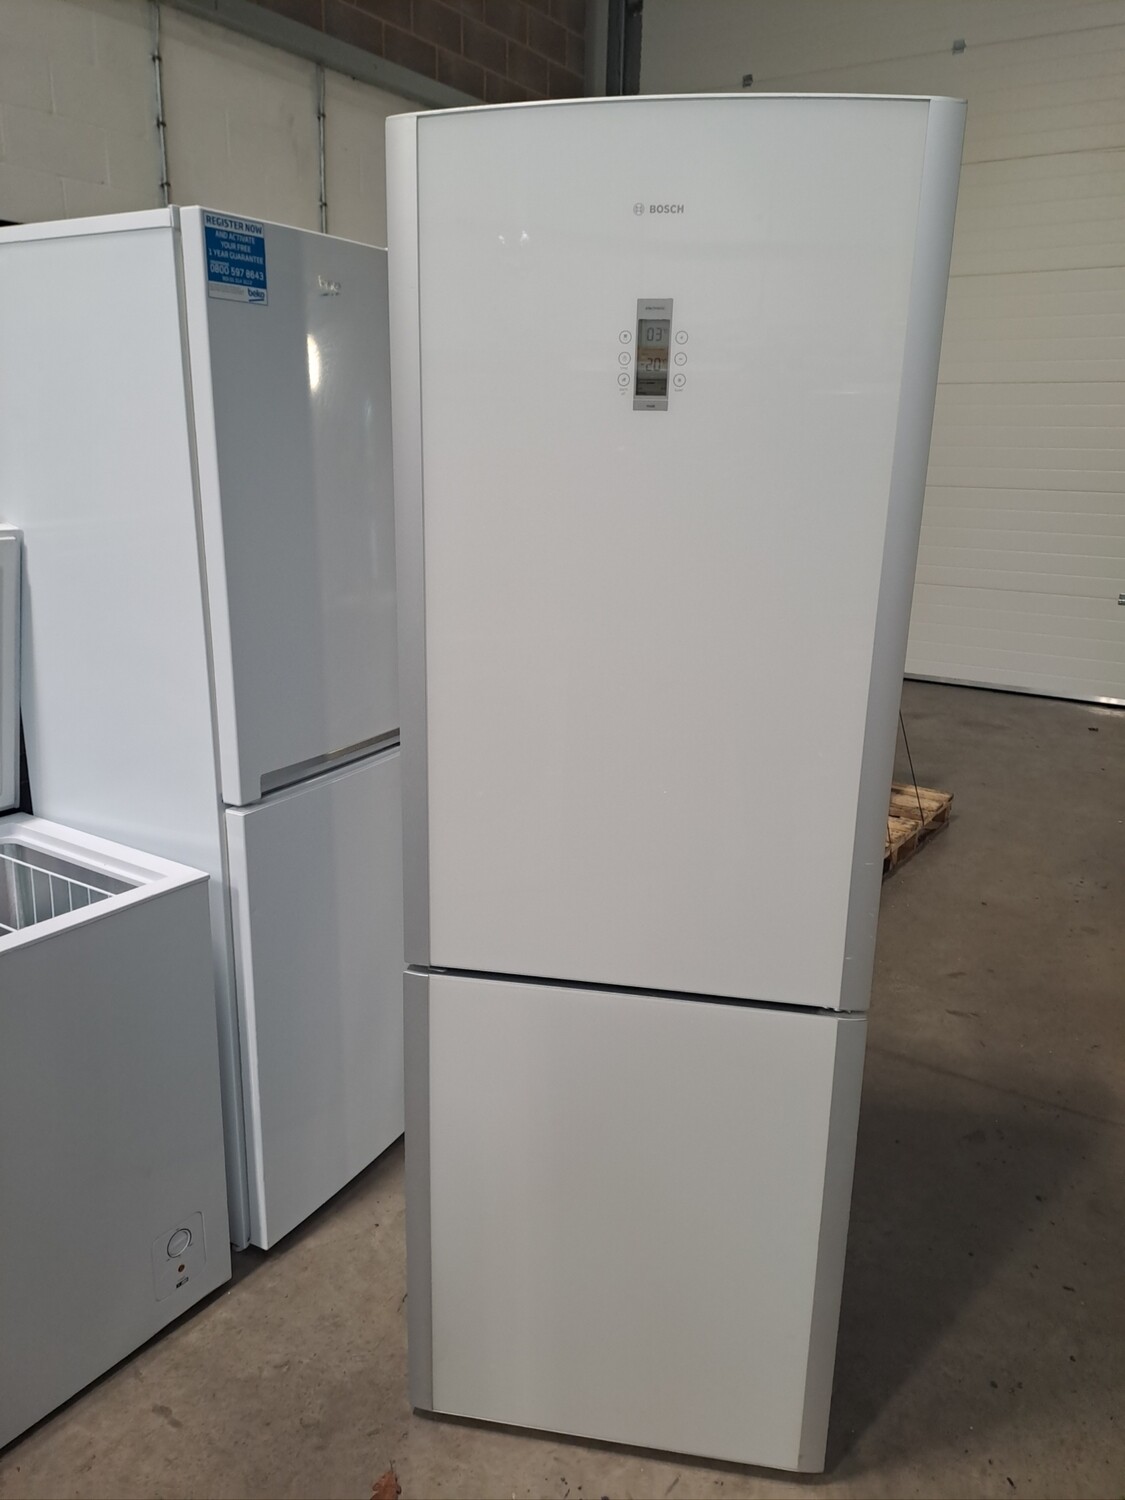 Bosch KGH36S20GB Fridge Freezer White H187 x W66 x D66 Refurbished 6 Month Guarantee. This item is located in our Whitby Road Shop 